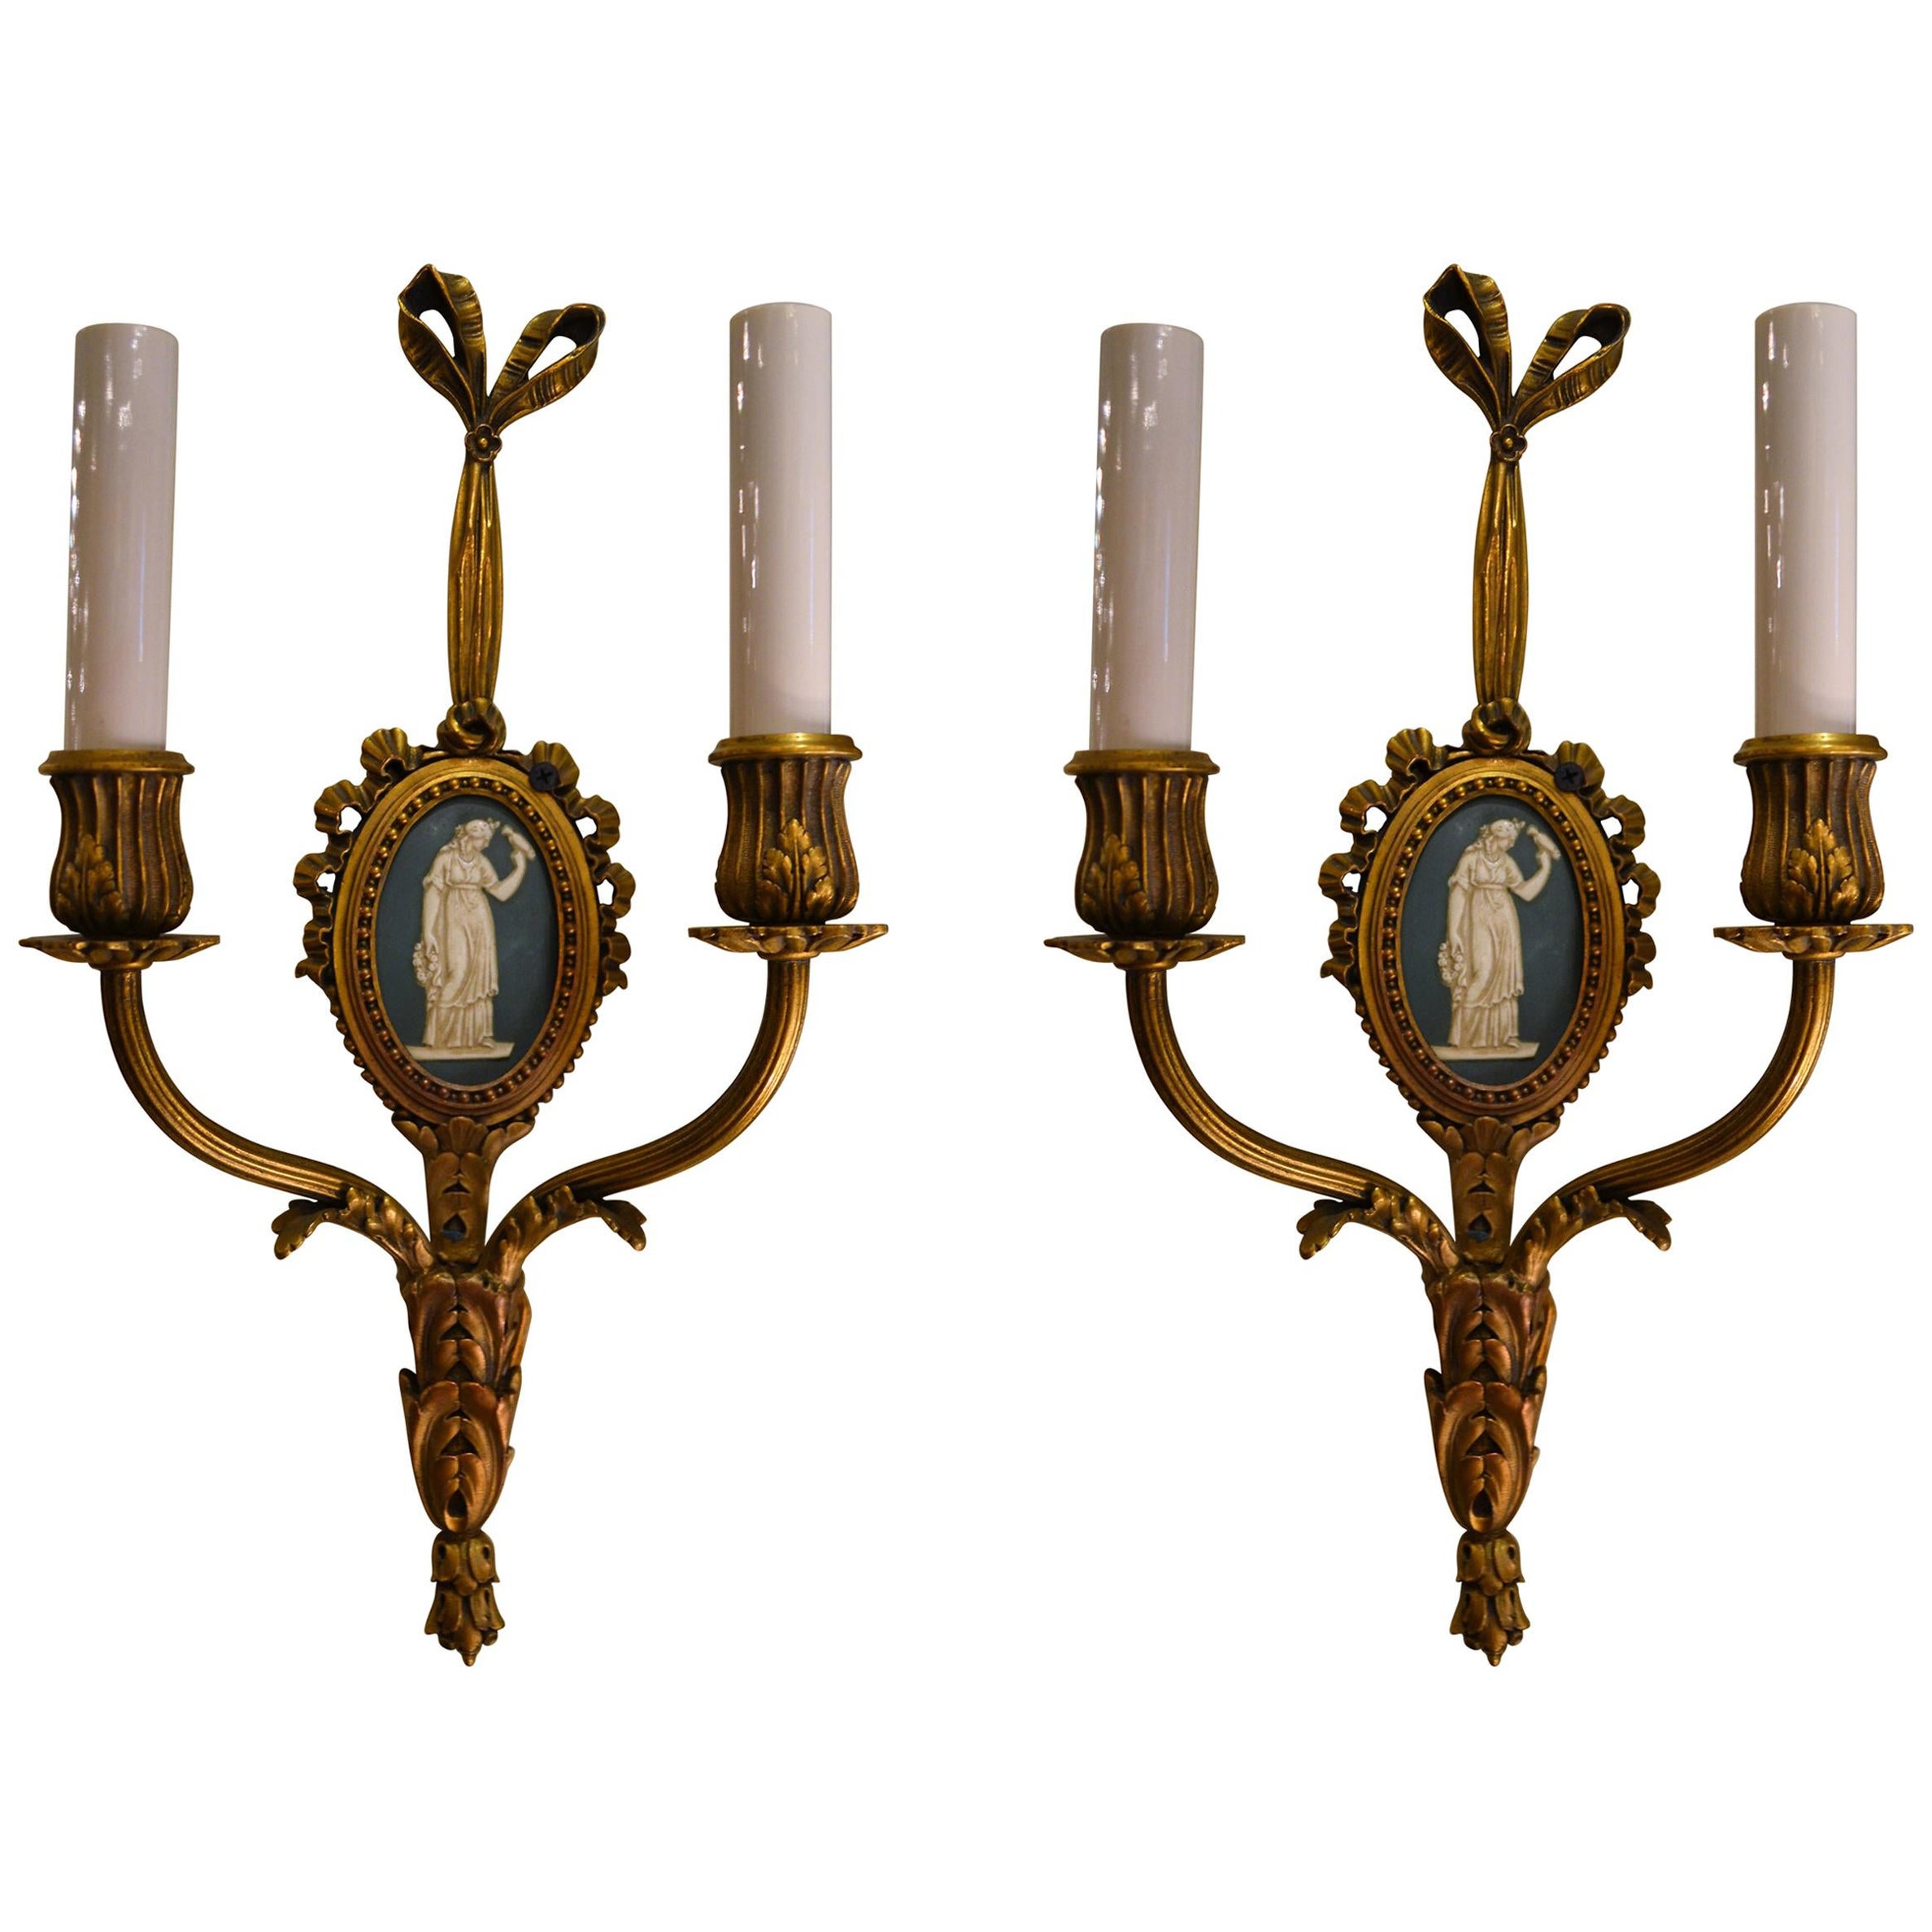 Pair of Elegant Antique French Bronze Wall Sconces with Plaque Inserts